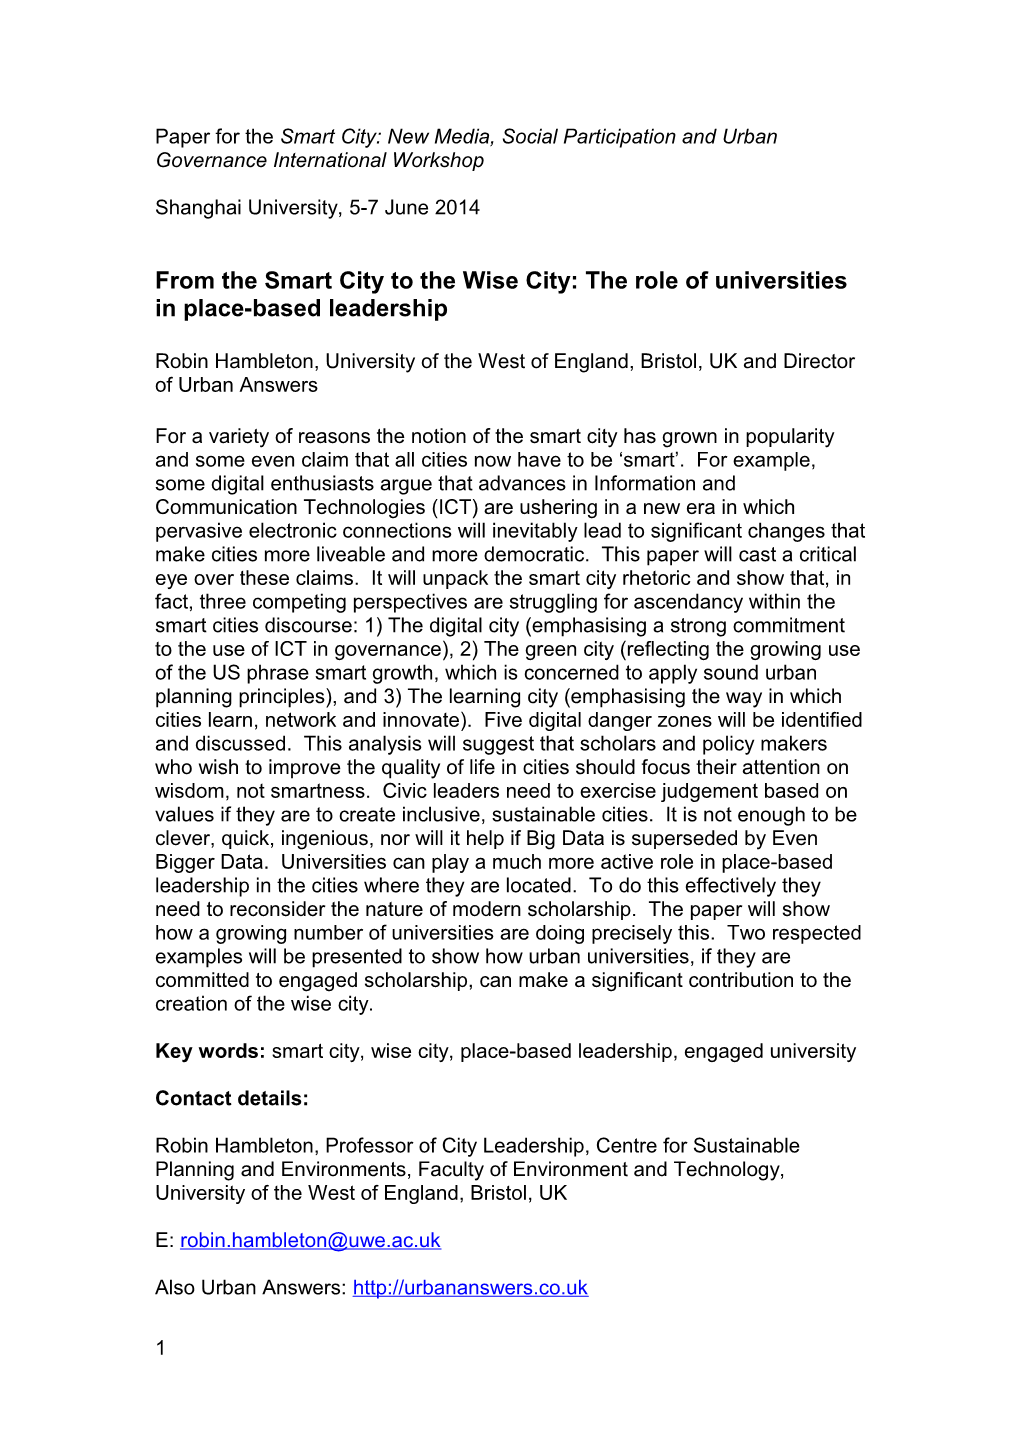 From the Smart City to the Wise City: the Role of Universities in Place-Based Leadership